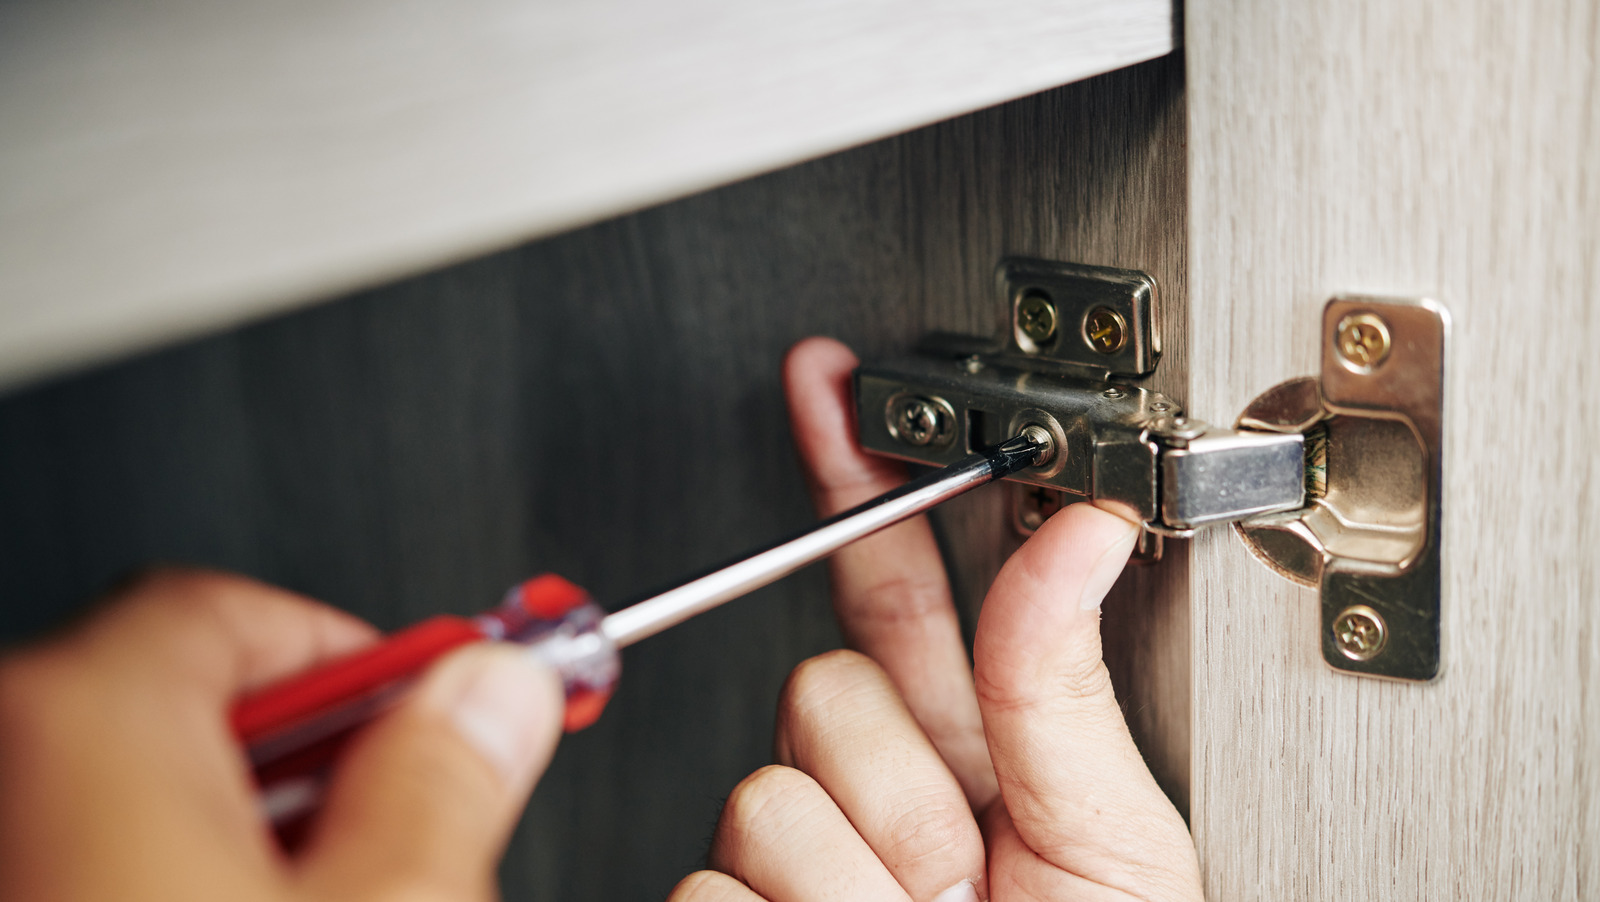 Expert Cabinet Maker Explains The Different Types Of Hinges (And